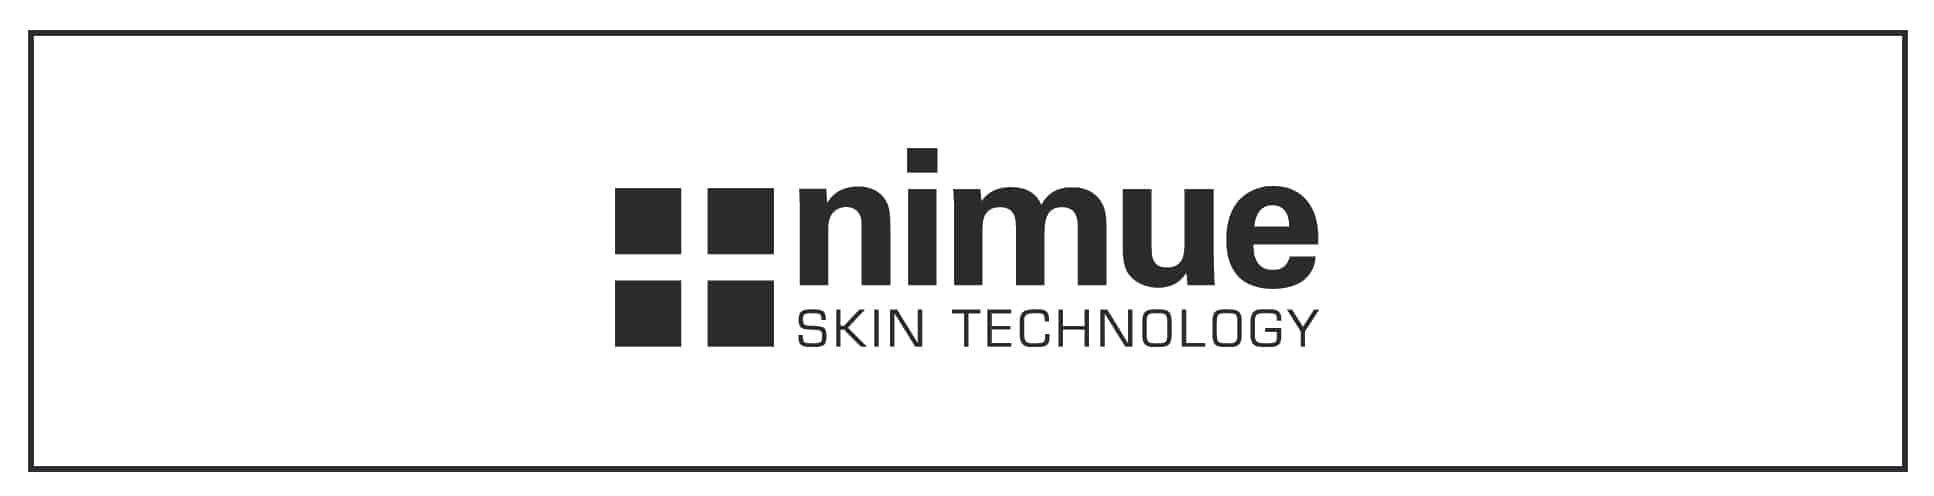 A black and white logo for nimue skin technology.